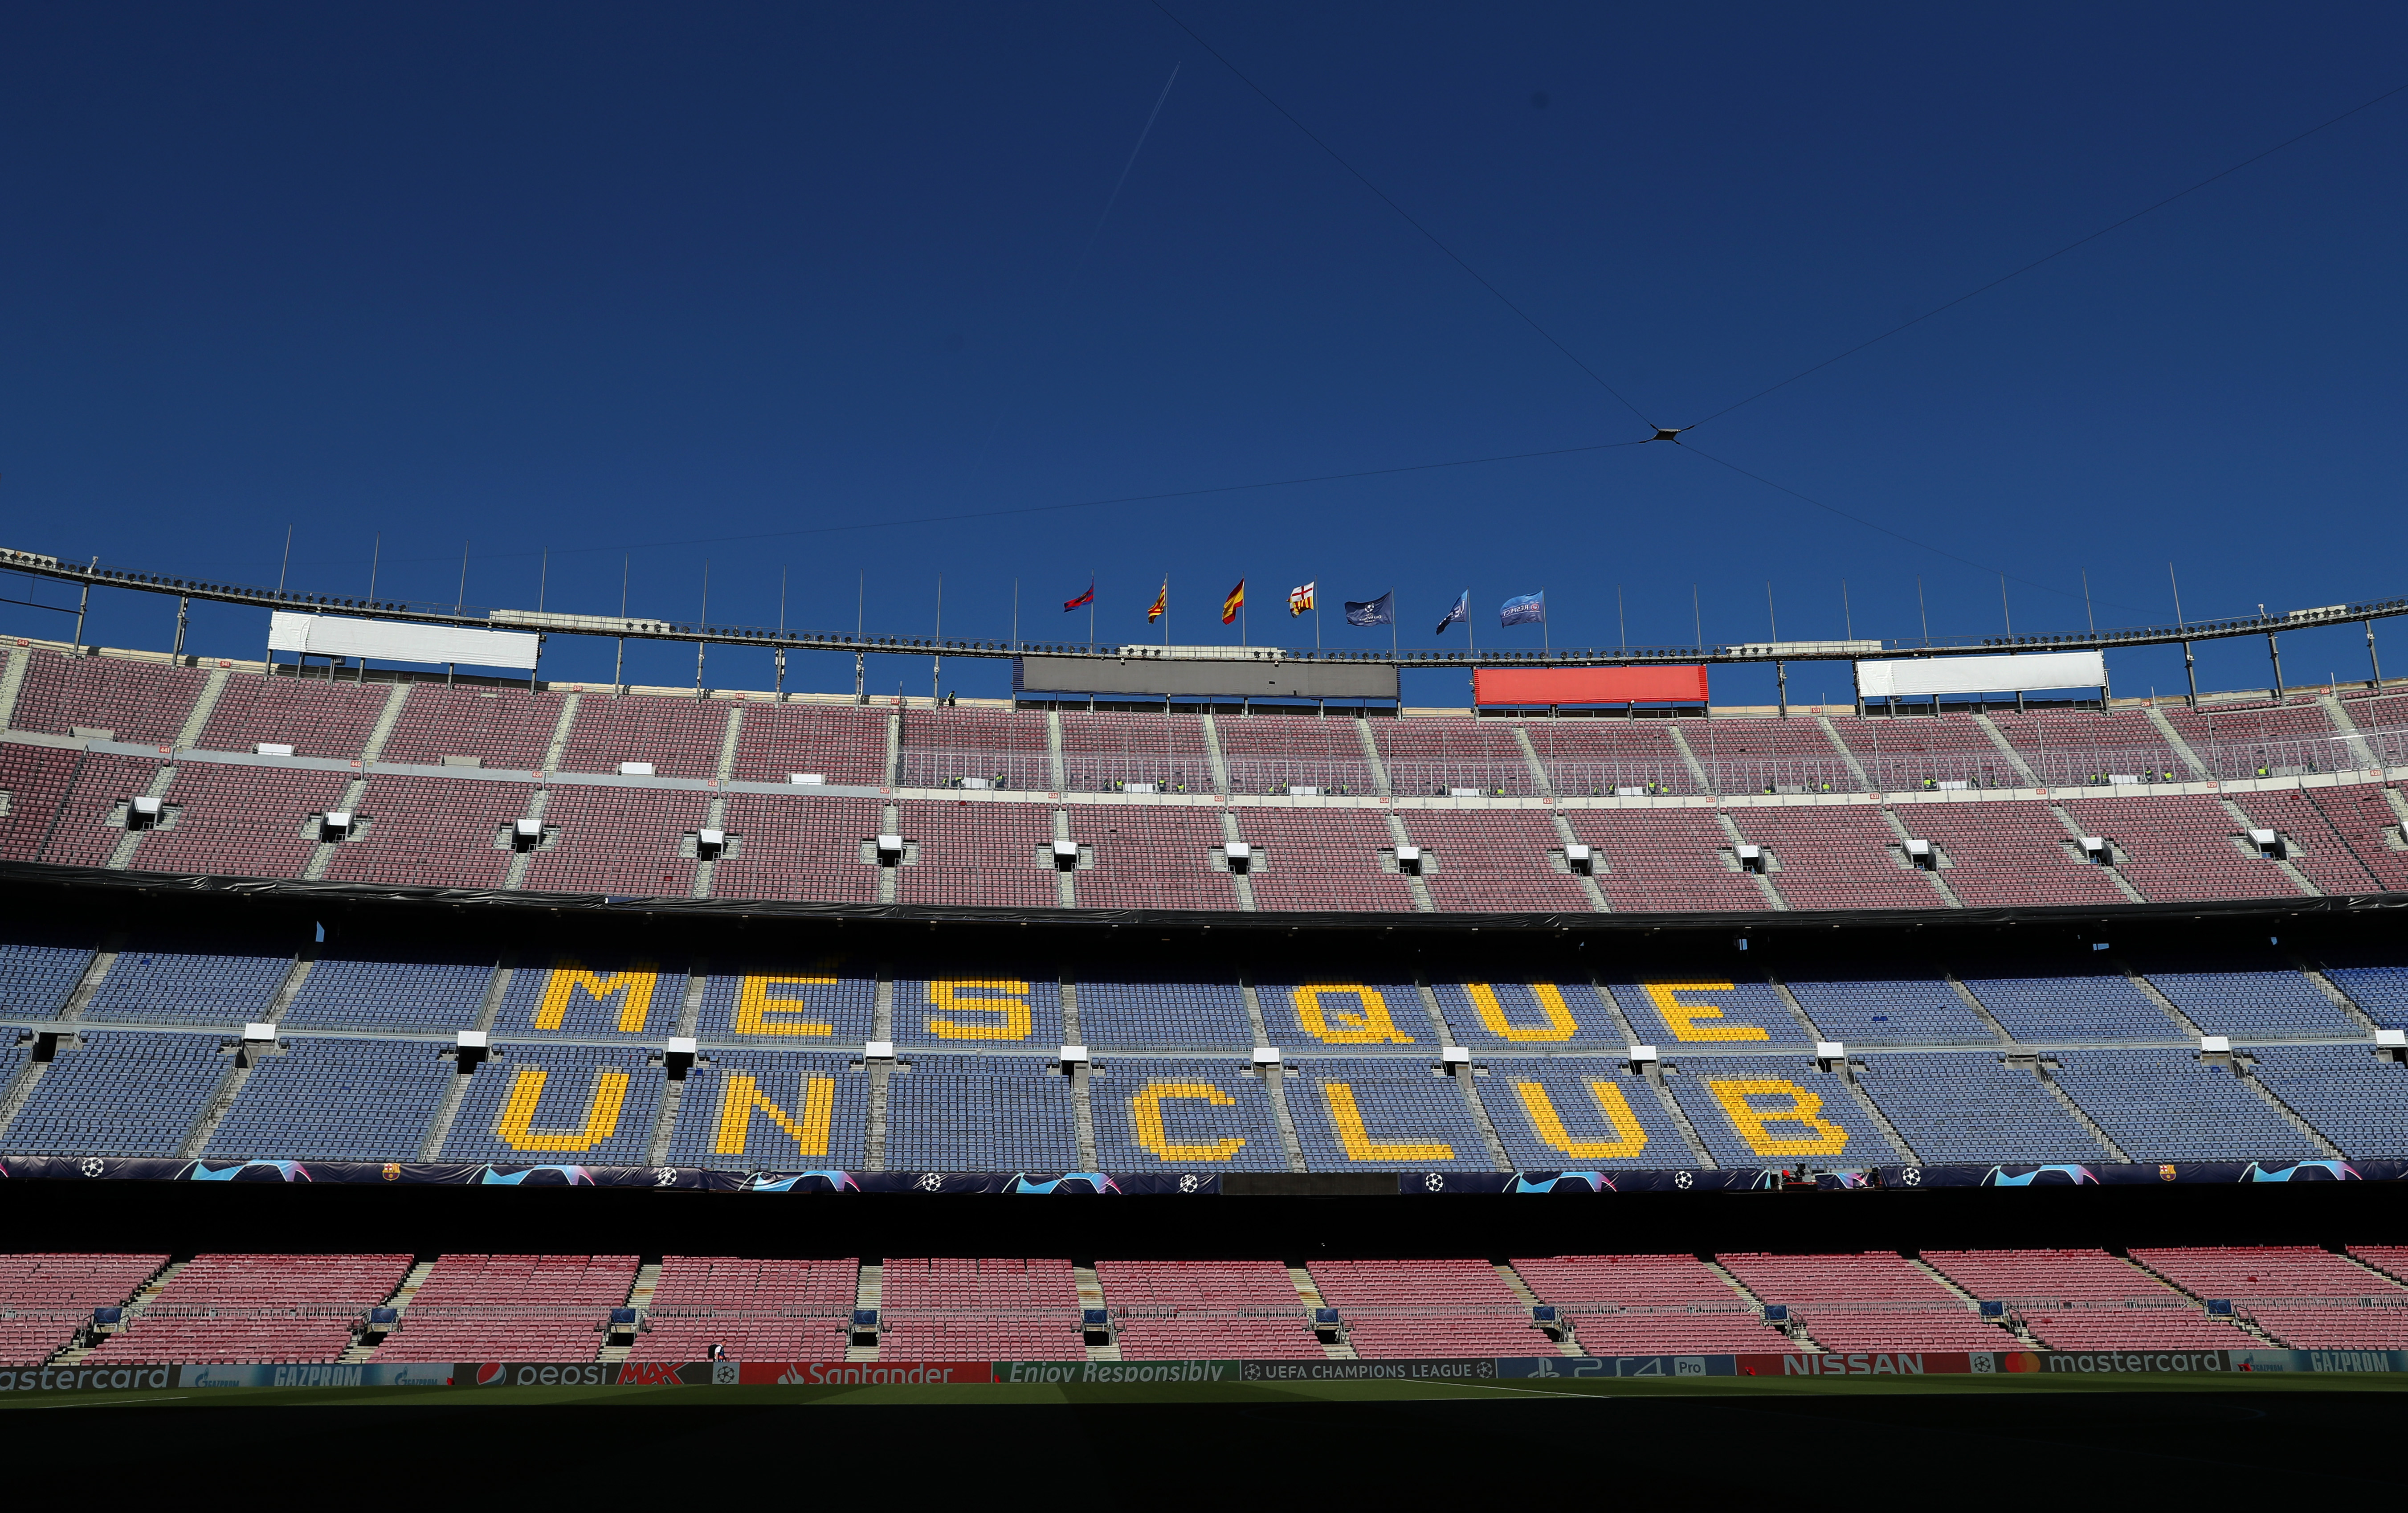 BARCELONA, SPAIN - MAY 01: General view inside the stadium ahead of the UEFA Champions League Semi Final first leg match between Barcelona and Liverpool at the Nou Camp on May 01, 2019 in Barcelona, Spain. (Photo by Catherine Ivill/Getty Images)